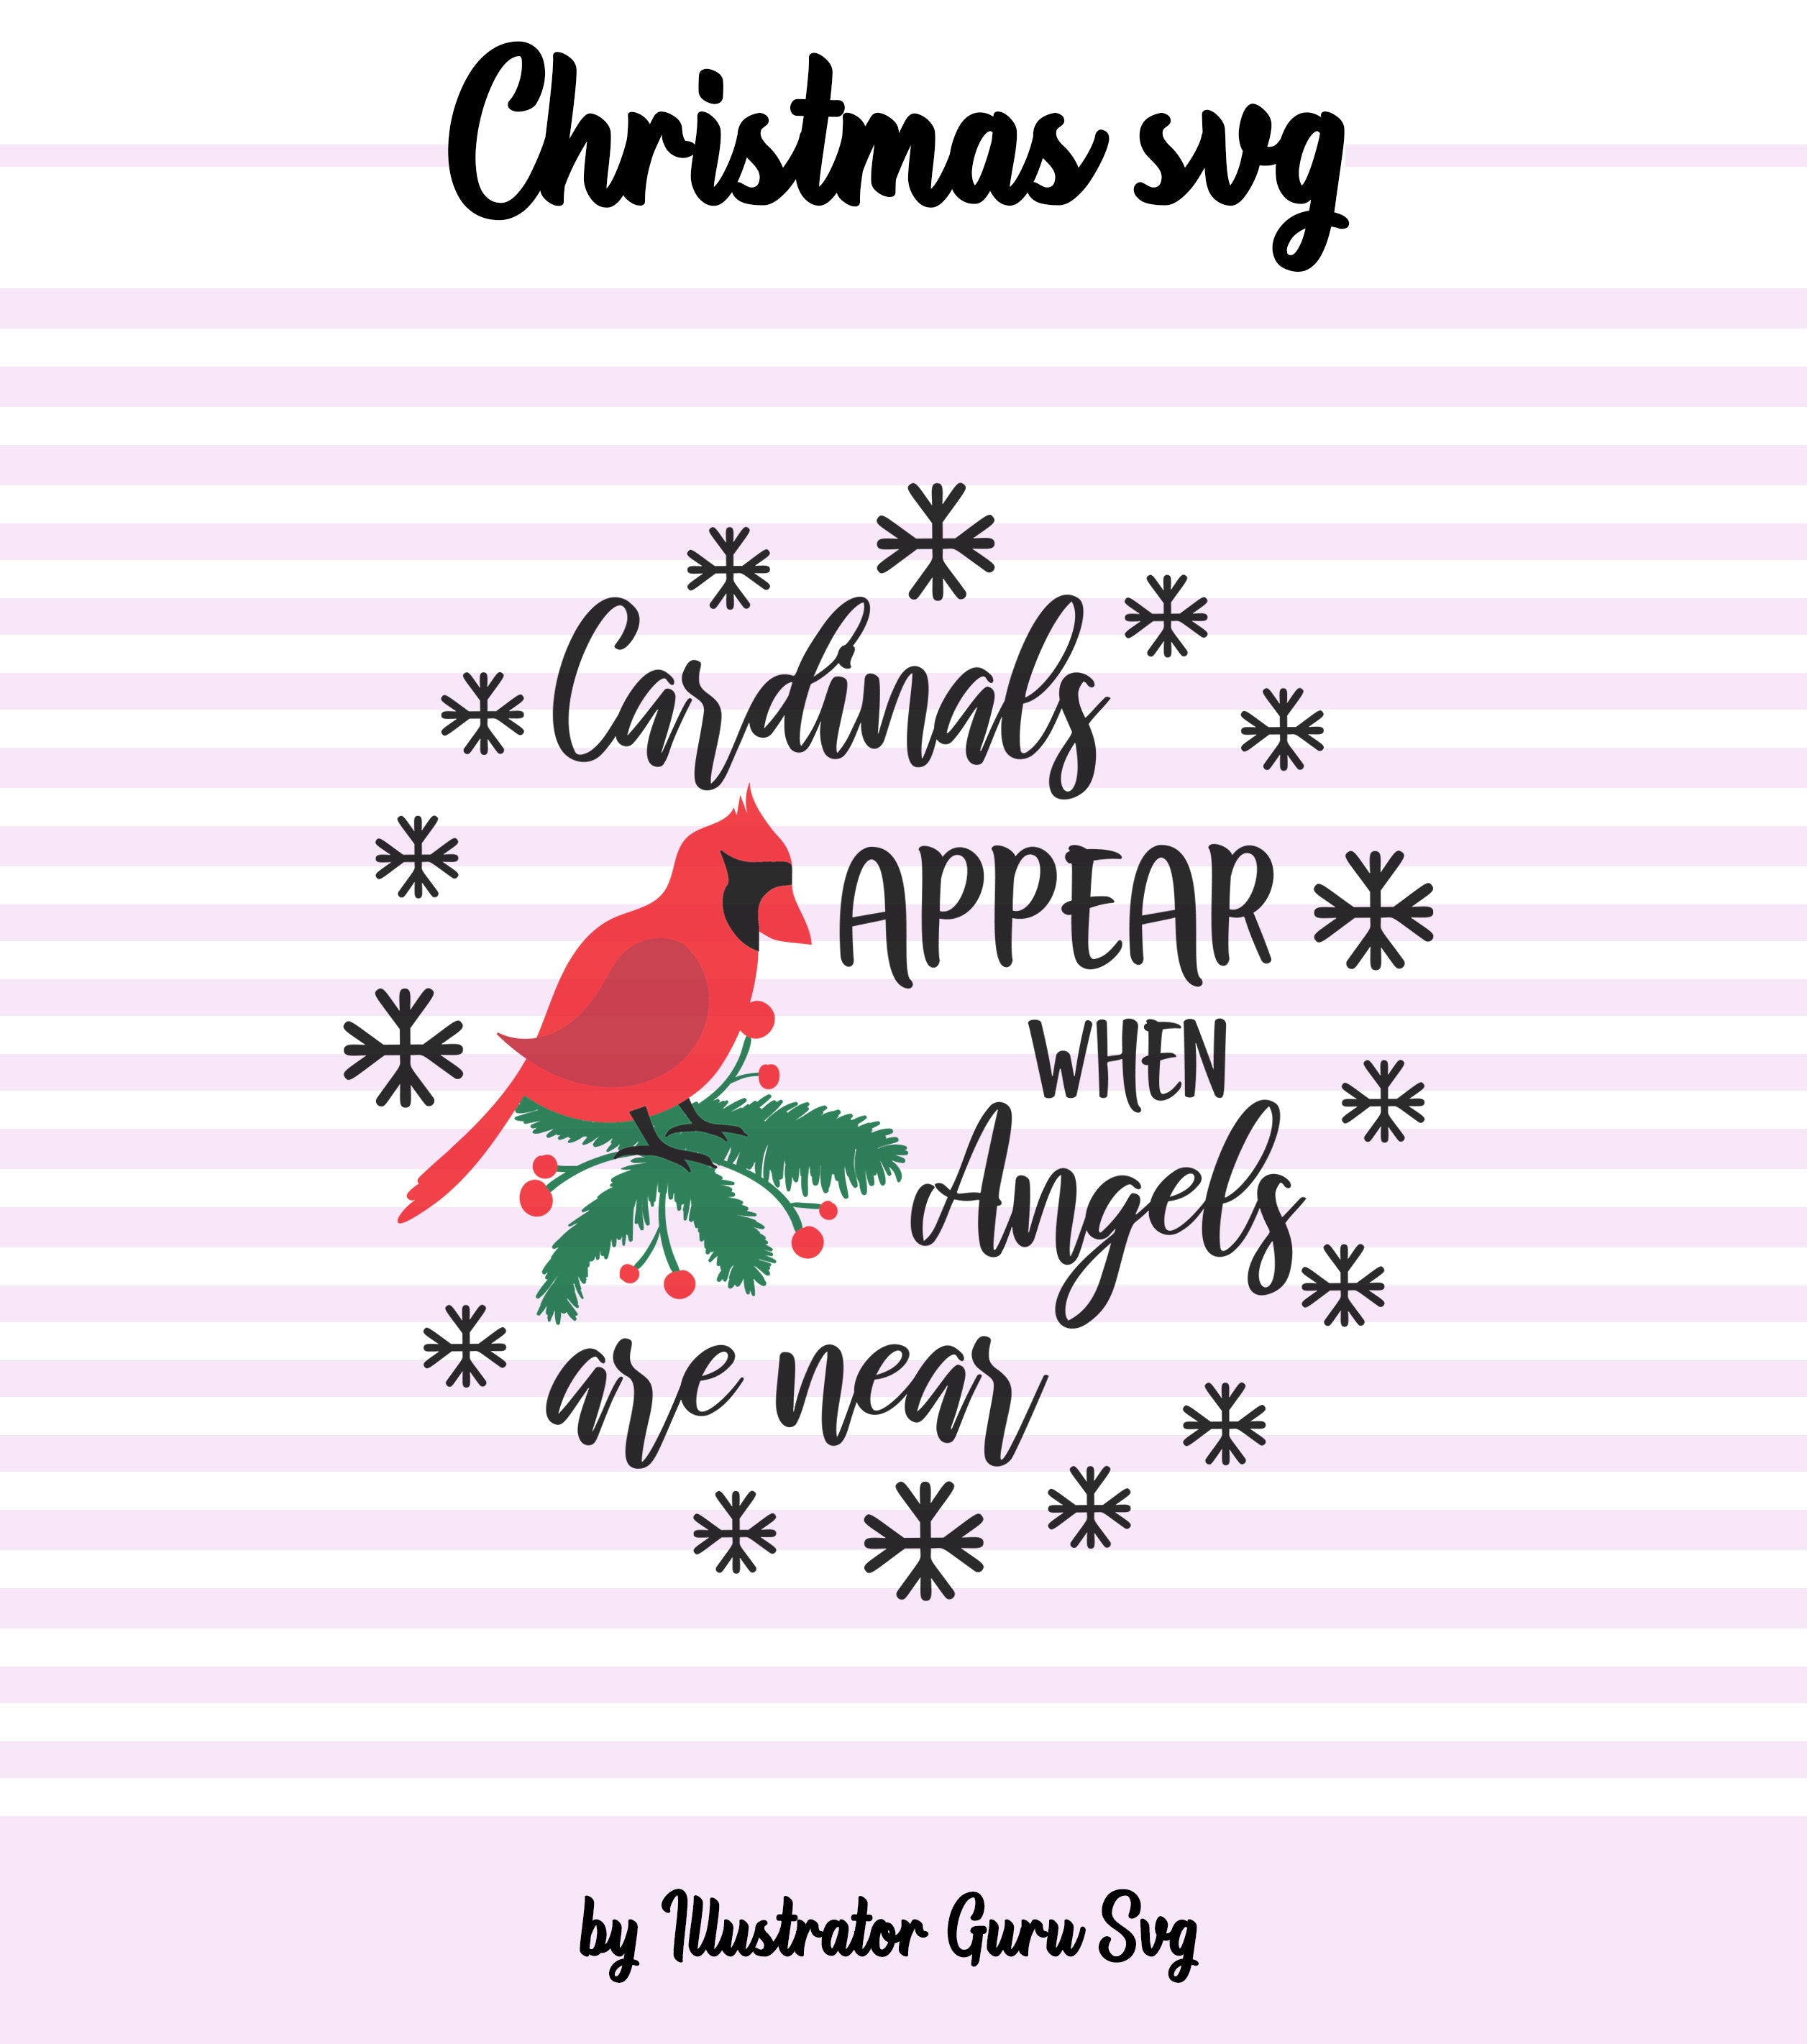 Download Cardinals Appear When Angels Are near Svg for Christmas ...